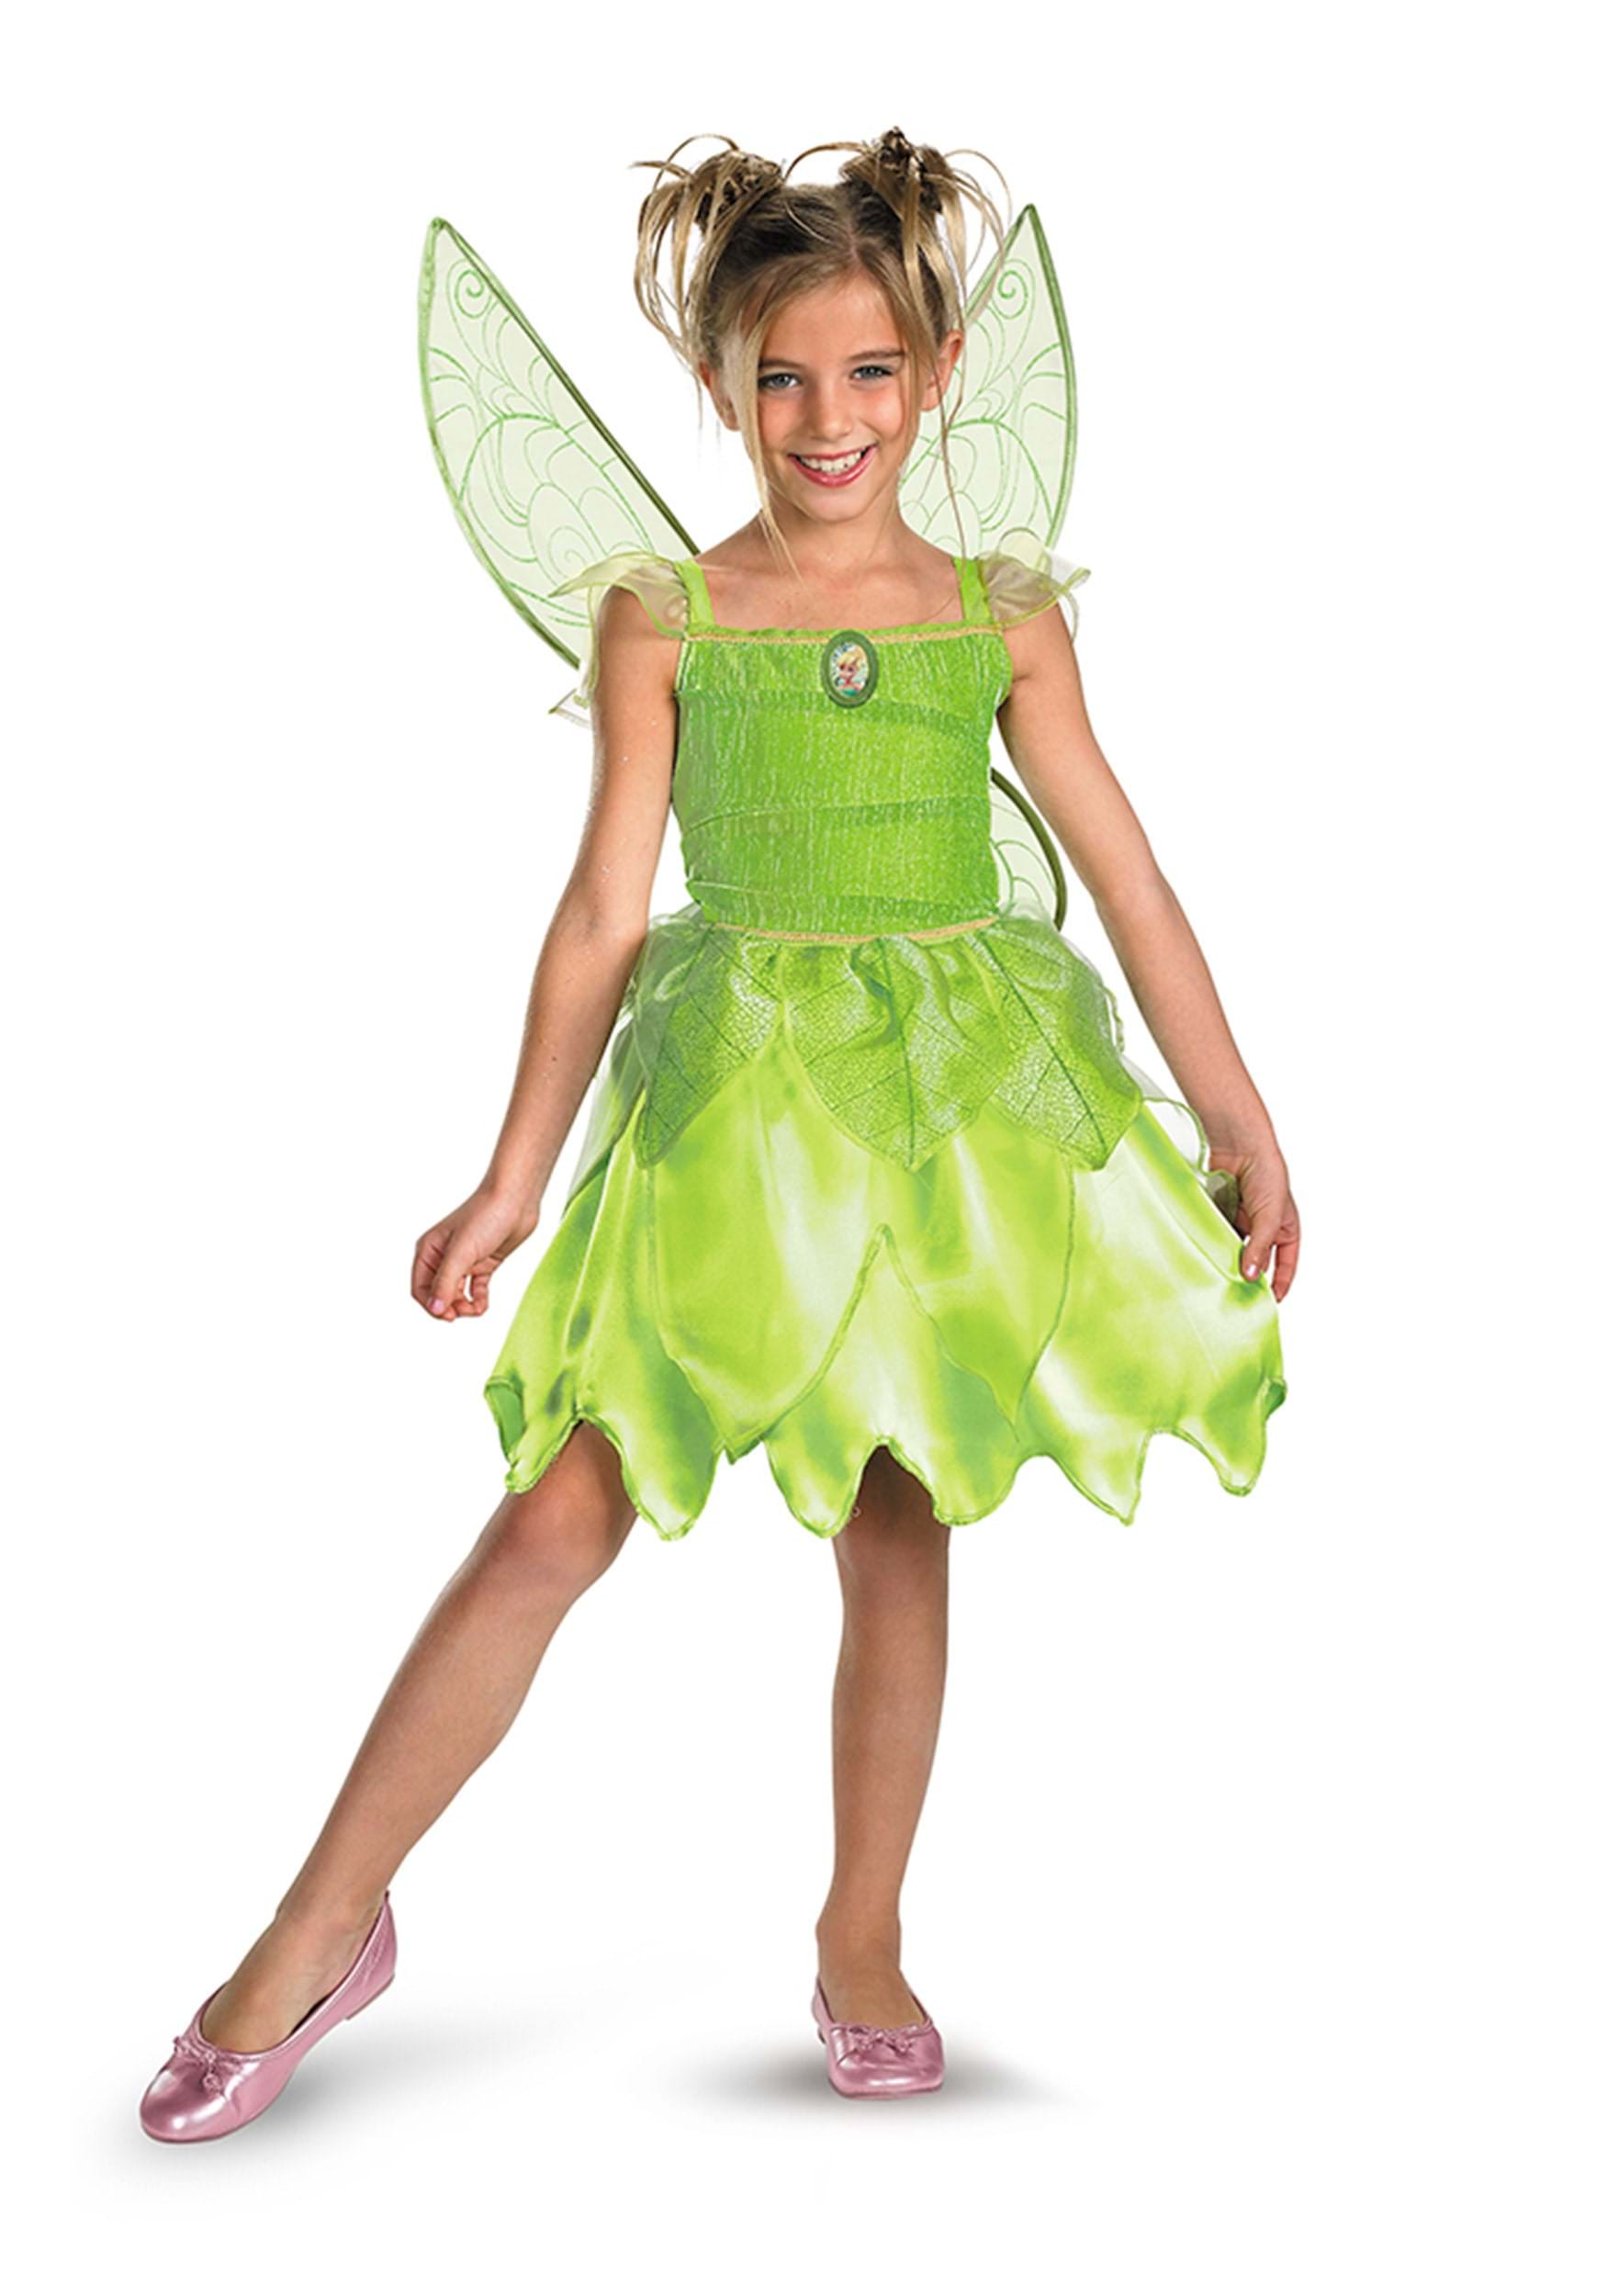 https://images.halloweencostumes.ca/products/73291/1-1/tinker-bell-tink-and-the-fairy-rescue-classic-costume.jpg